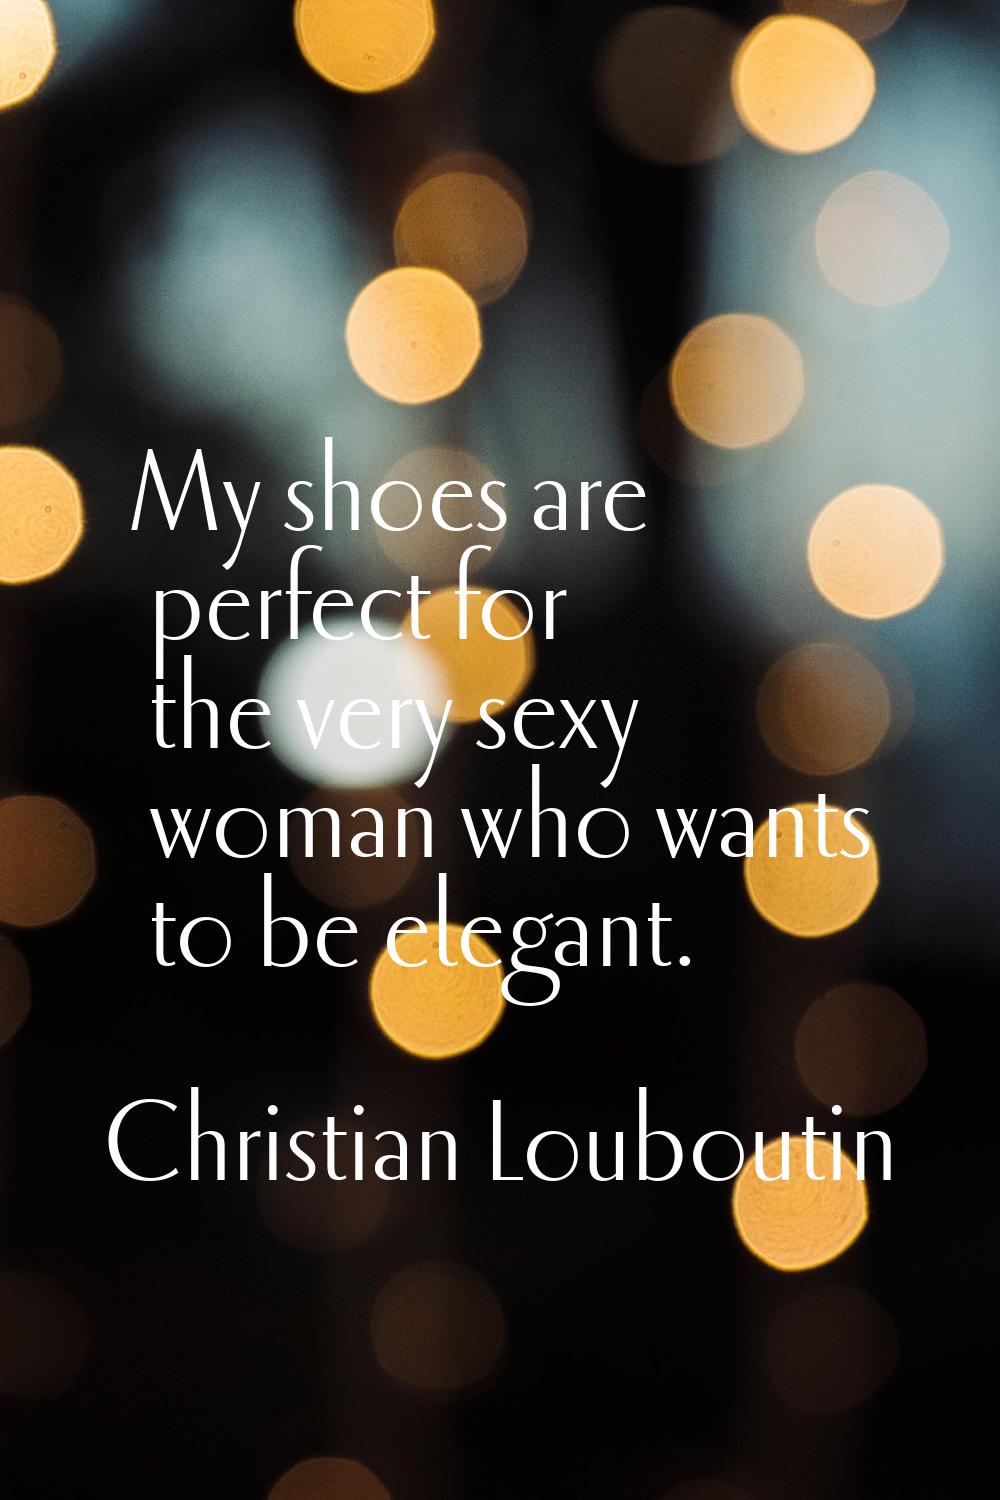 My shoes are perfect for the very sexy woman who wants to be elegant.